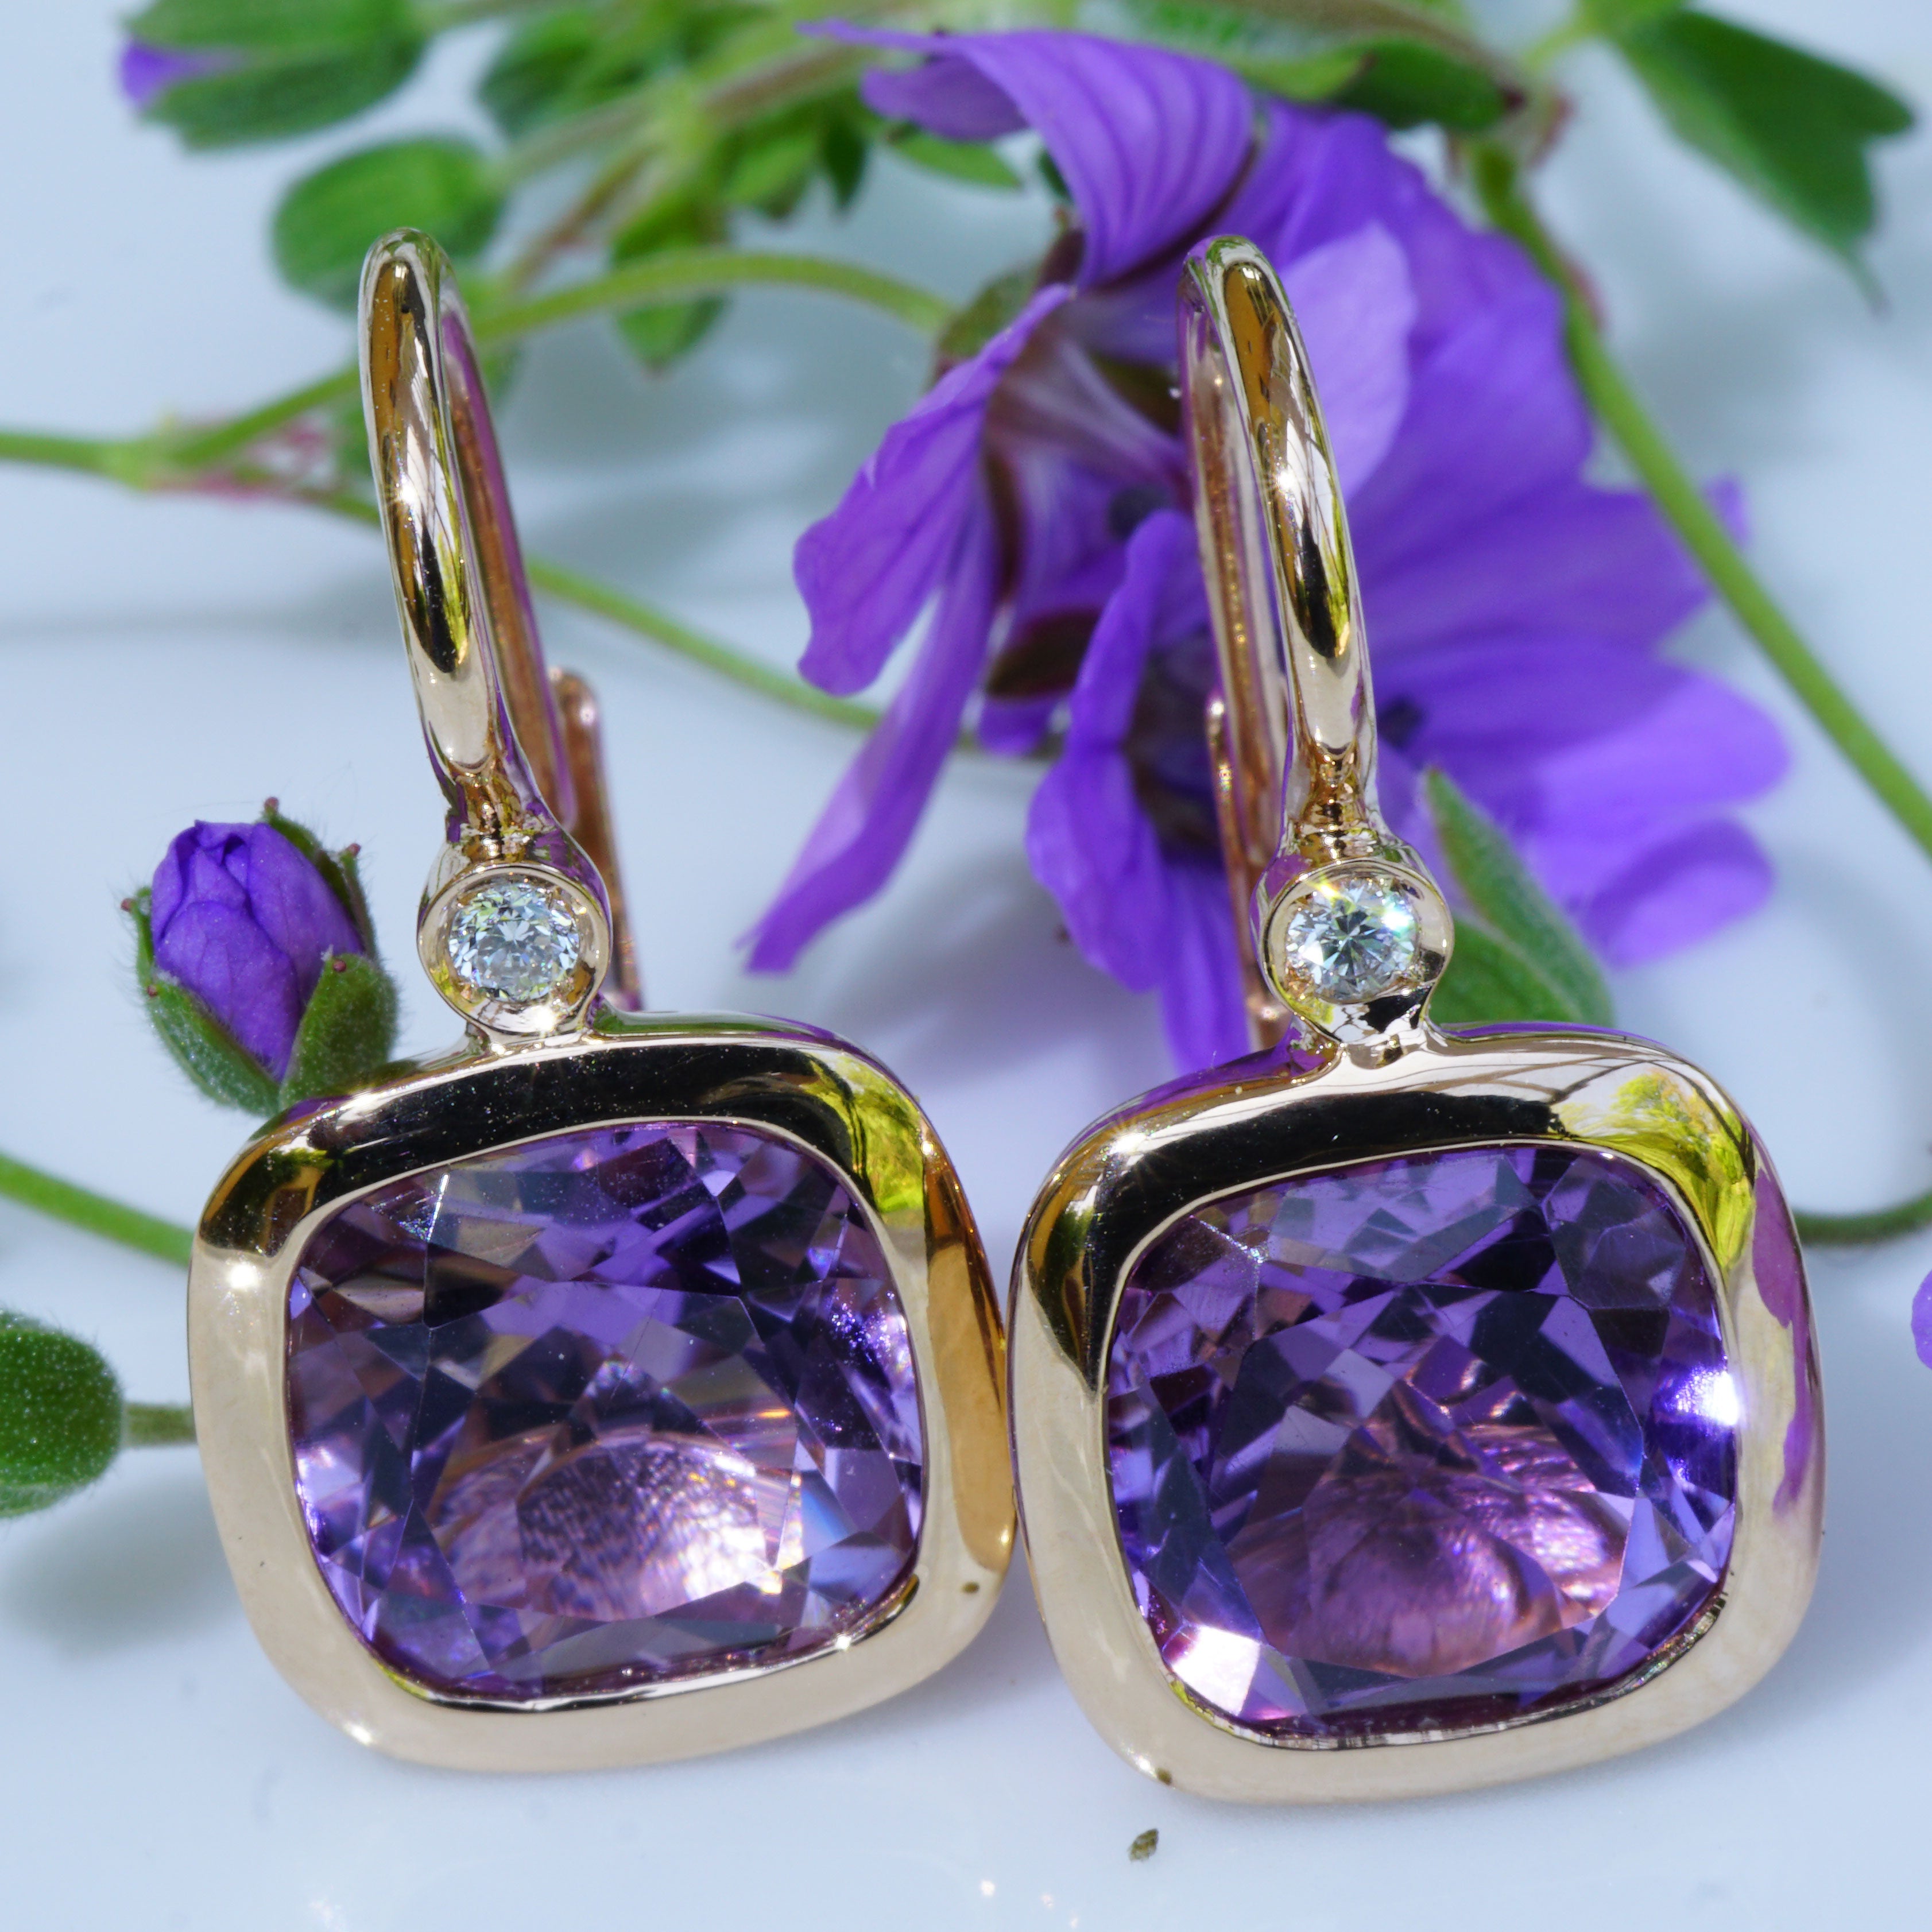 Earrings of high quality made in a traditional Italian goldsmith in Valenza, each a lilac-colored square Brazilian amethyst total approx. 5.73 ct, translucent underlined in a noble diamond-shaped openwork pattern, two full-cut brilliant-cut diamonds